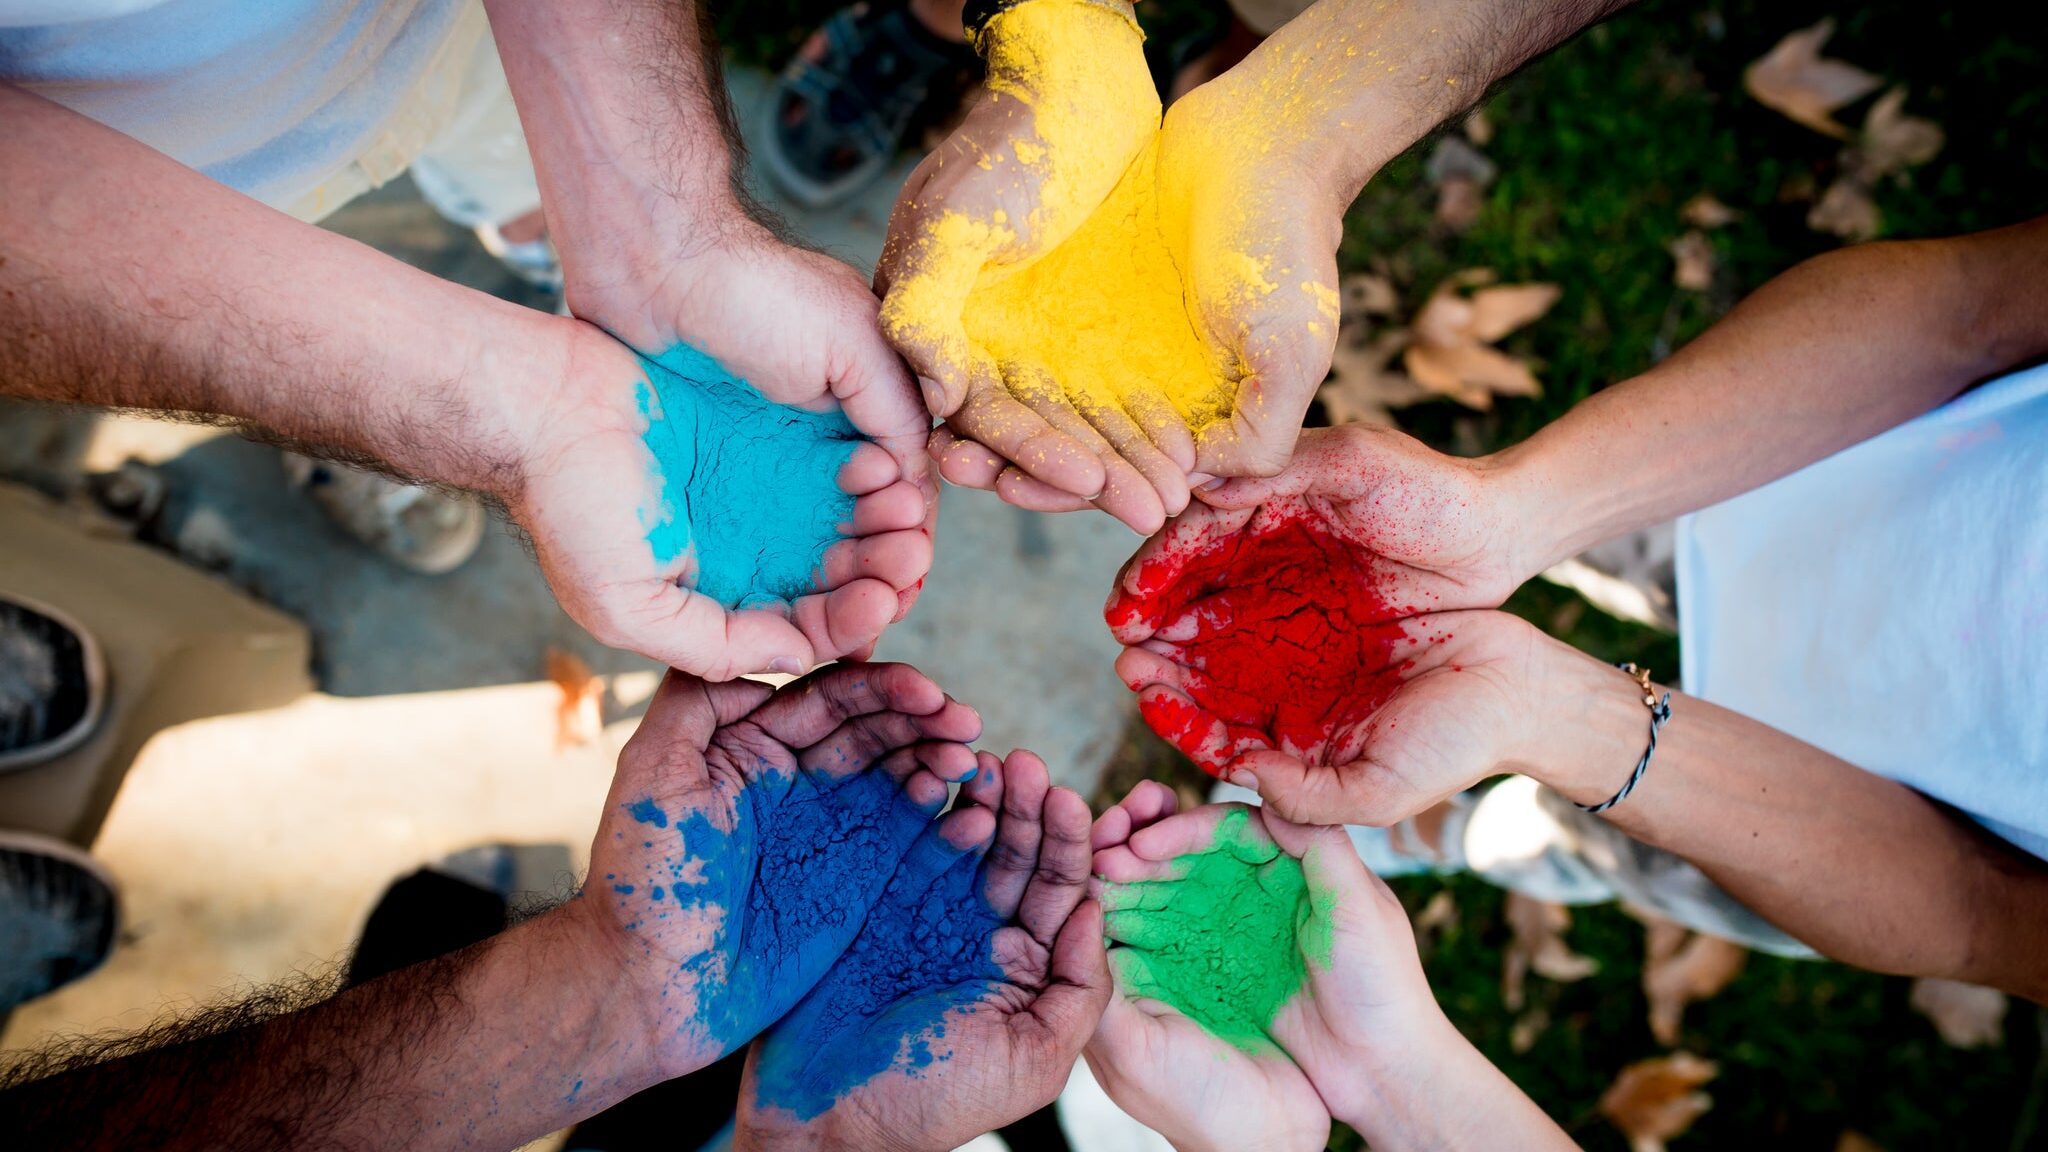 A group of people standing in a circle holding out their hands covered in vibrant colored powder, symbolizing unity, diversity, and creativity.